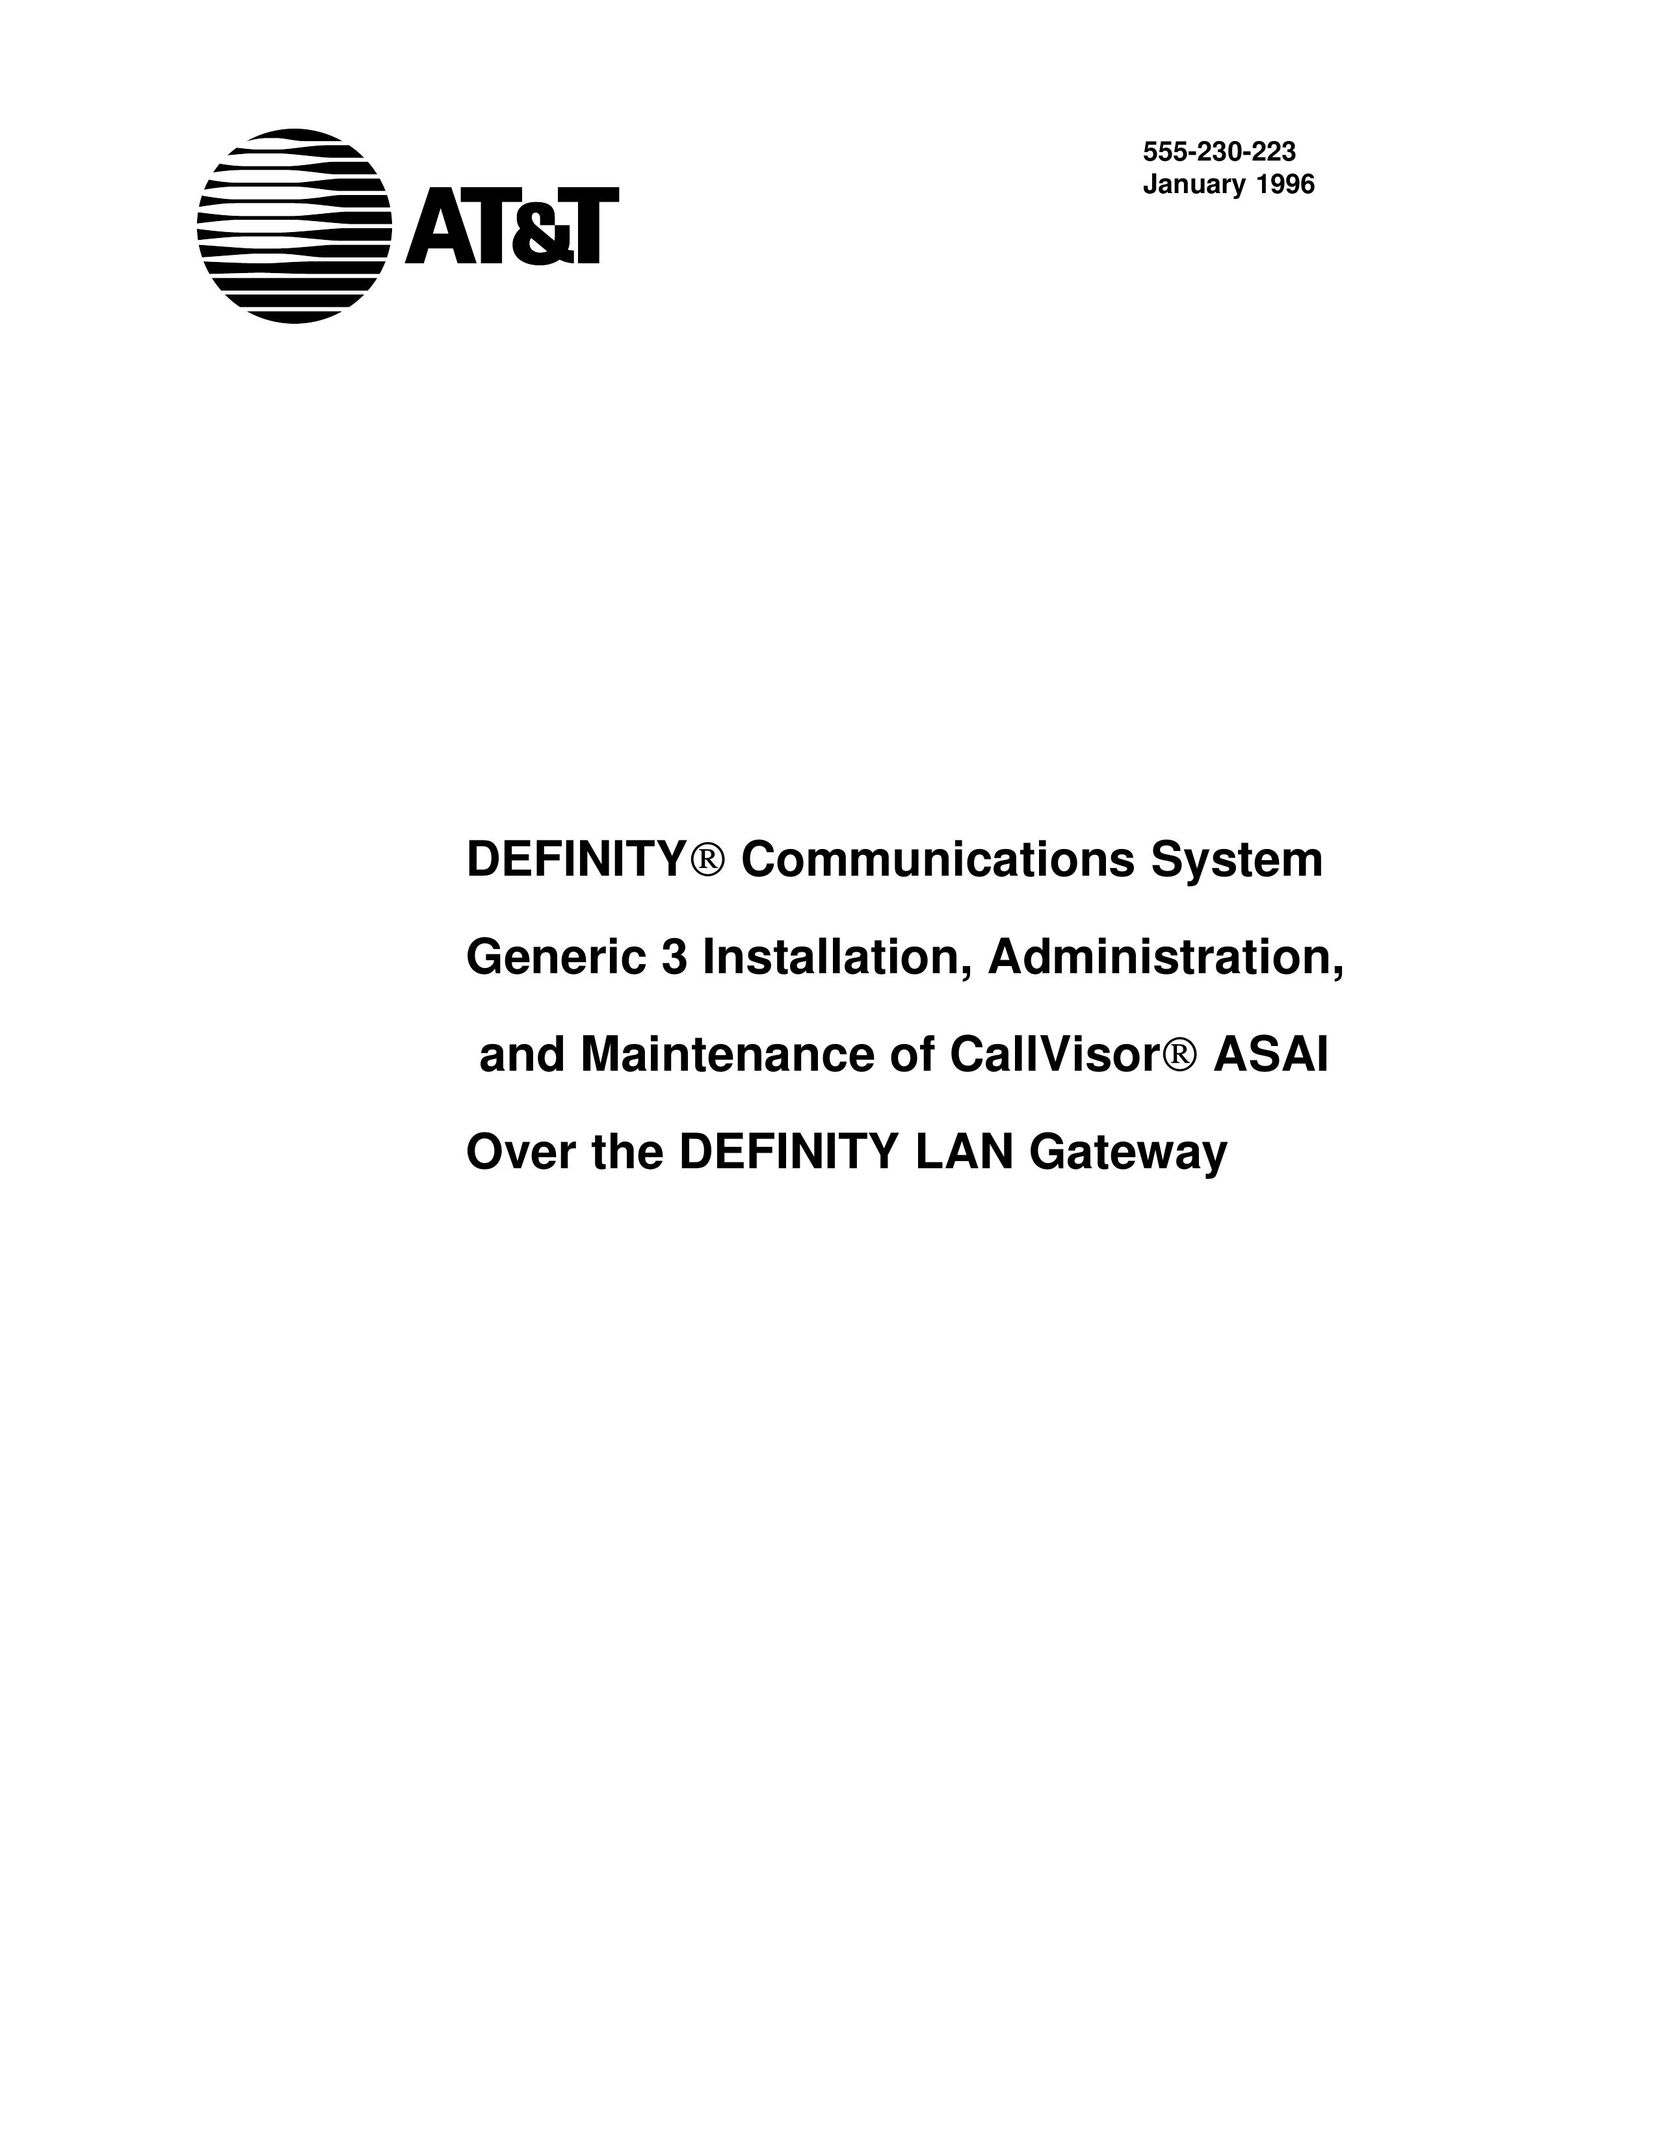 AT&T 555-230-223 Network Router User Manual